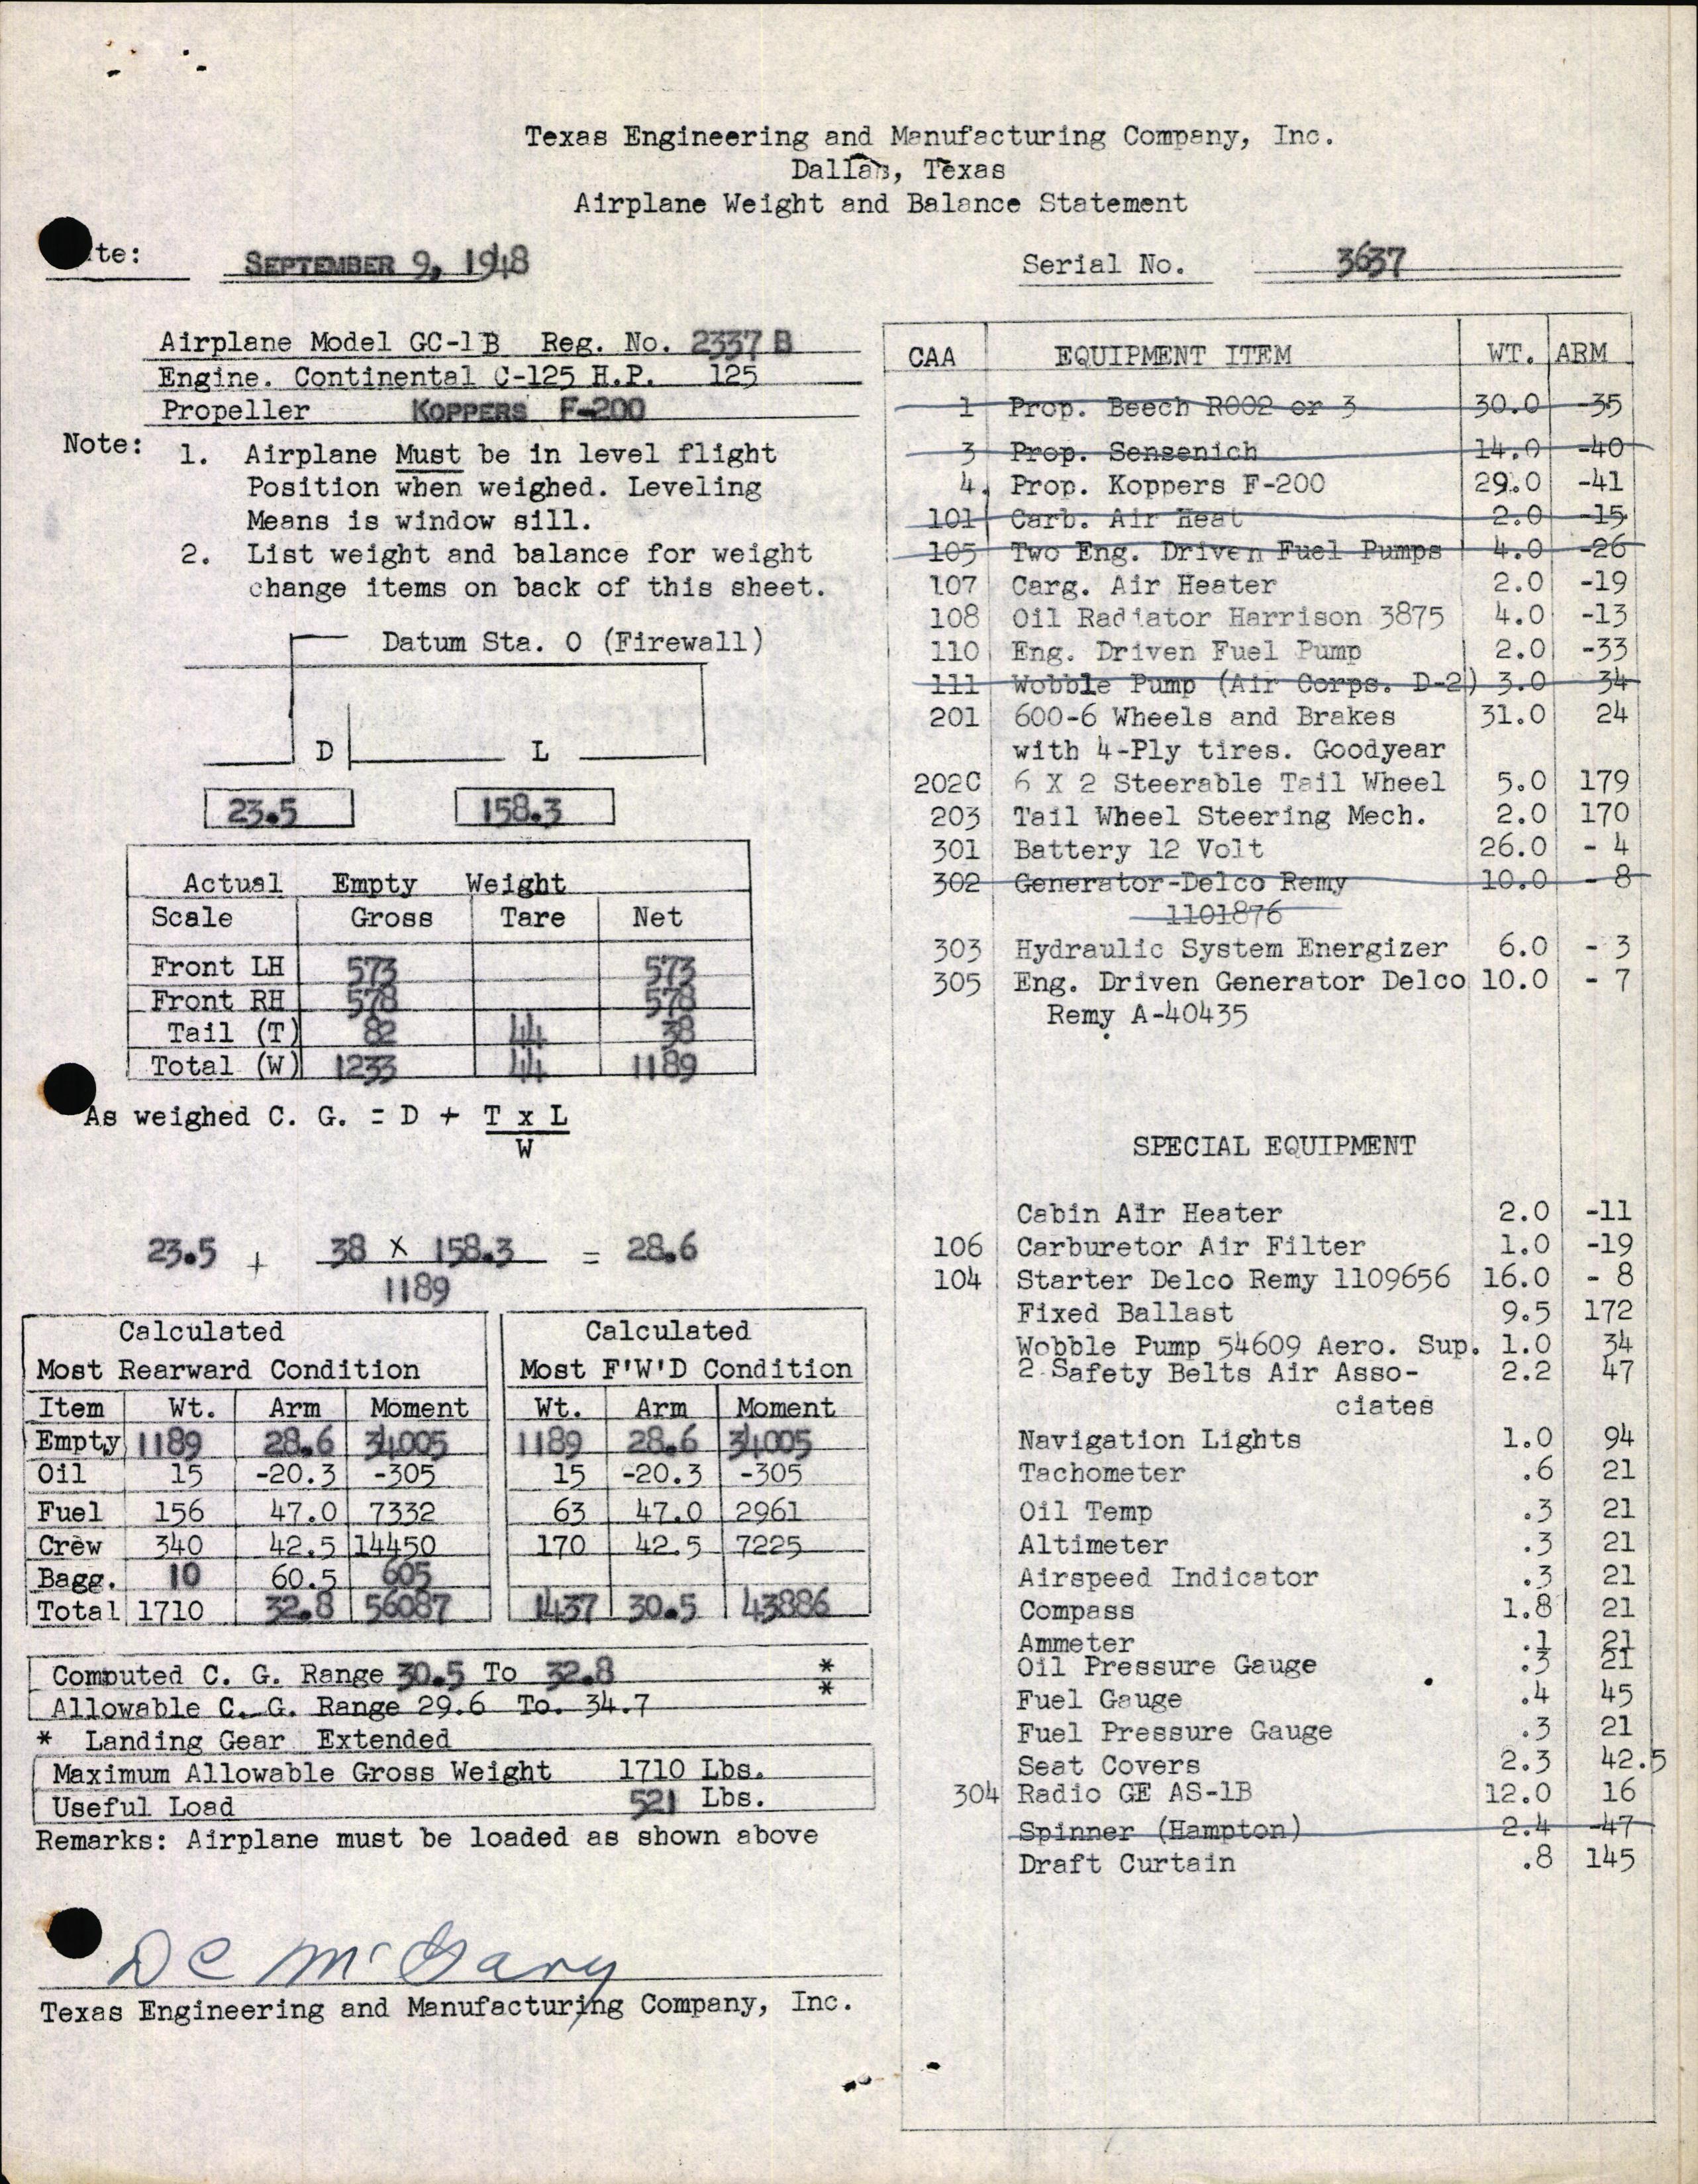 Sample page 4 from AirCorps Library document: Technical Information for Serial Number 3637